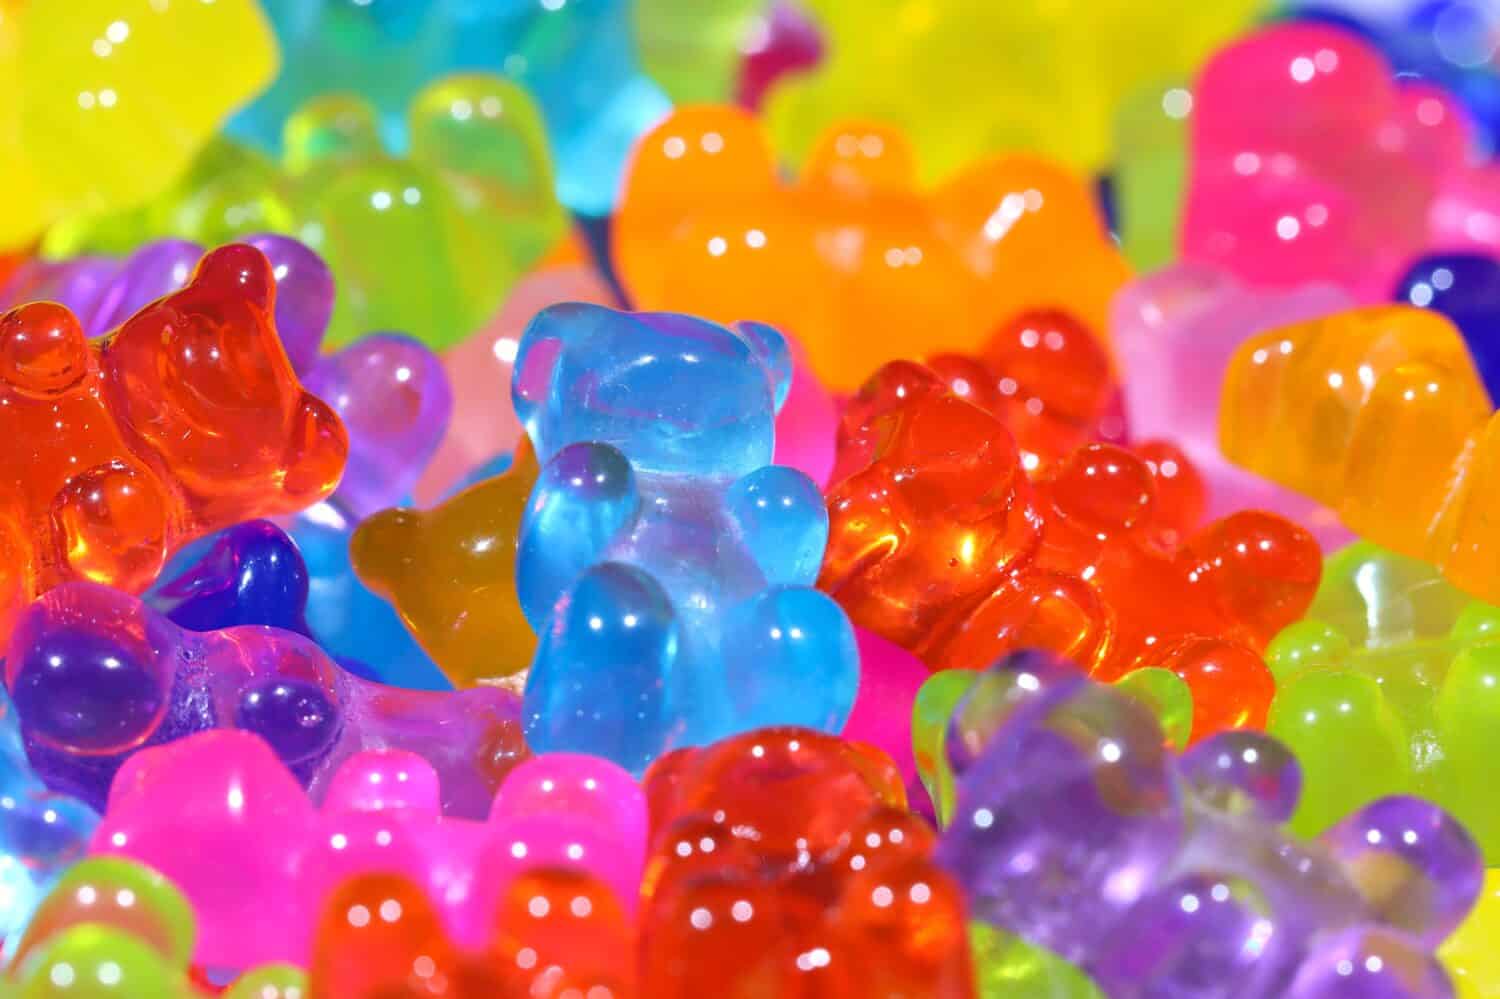 Pile of brightly lit gummy bear sweets. Shallow depth of field, central focus.